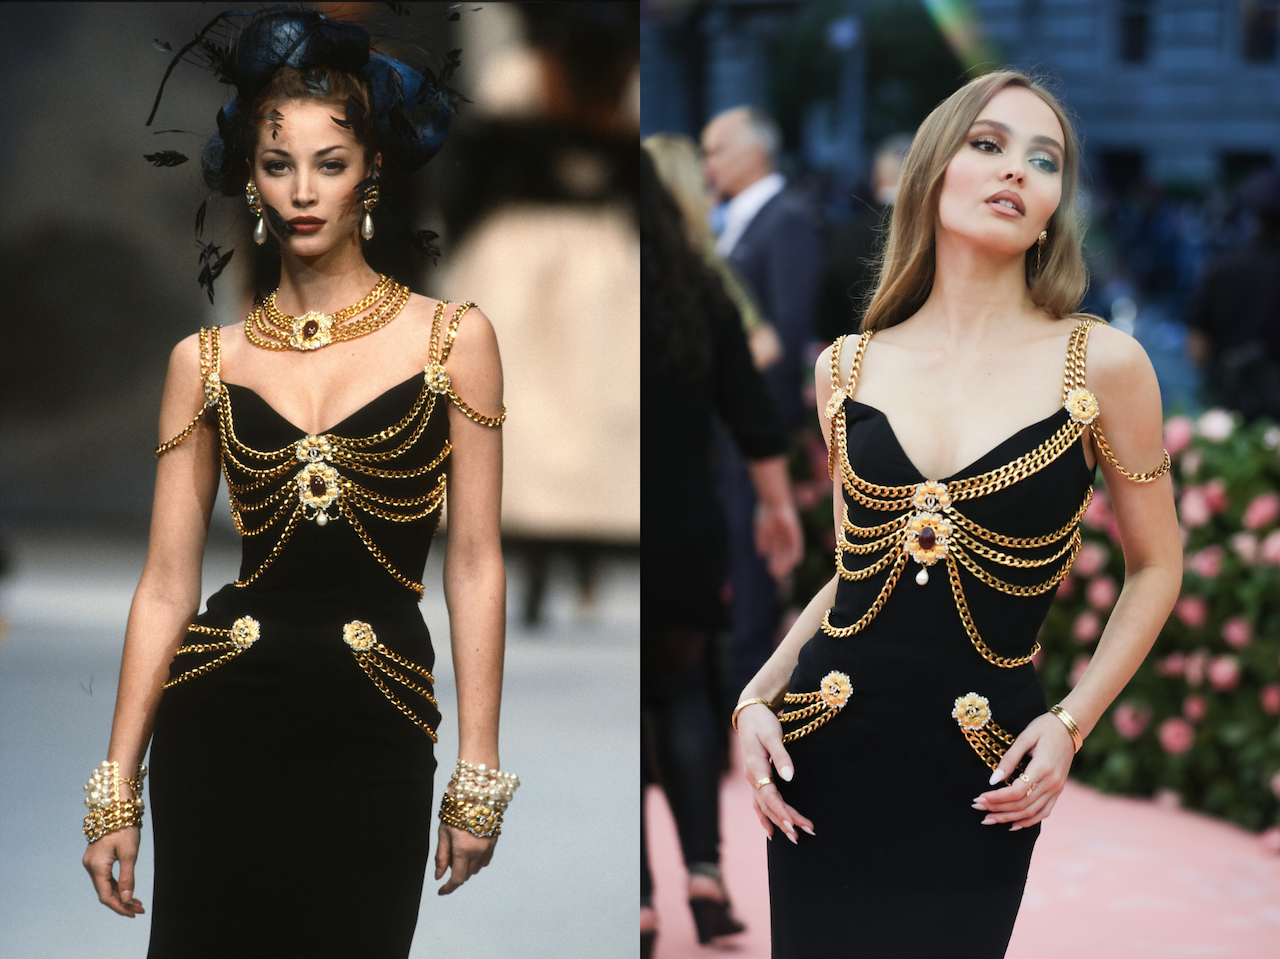 The Most Memorable Chanel Looks Ever Worn to the Met Gala